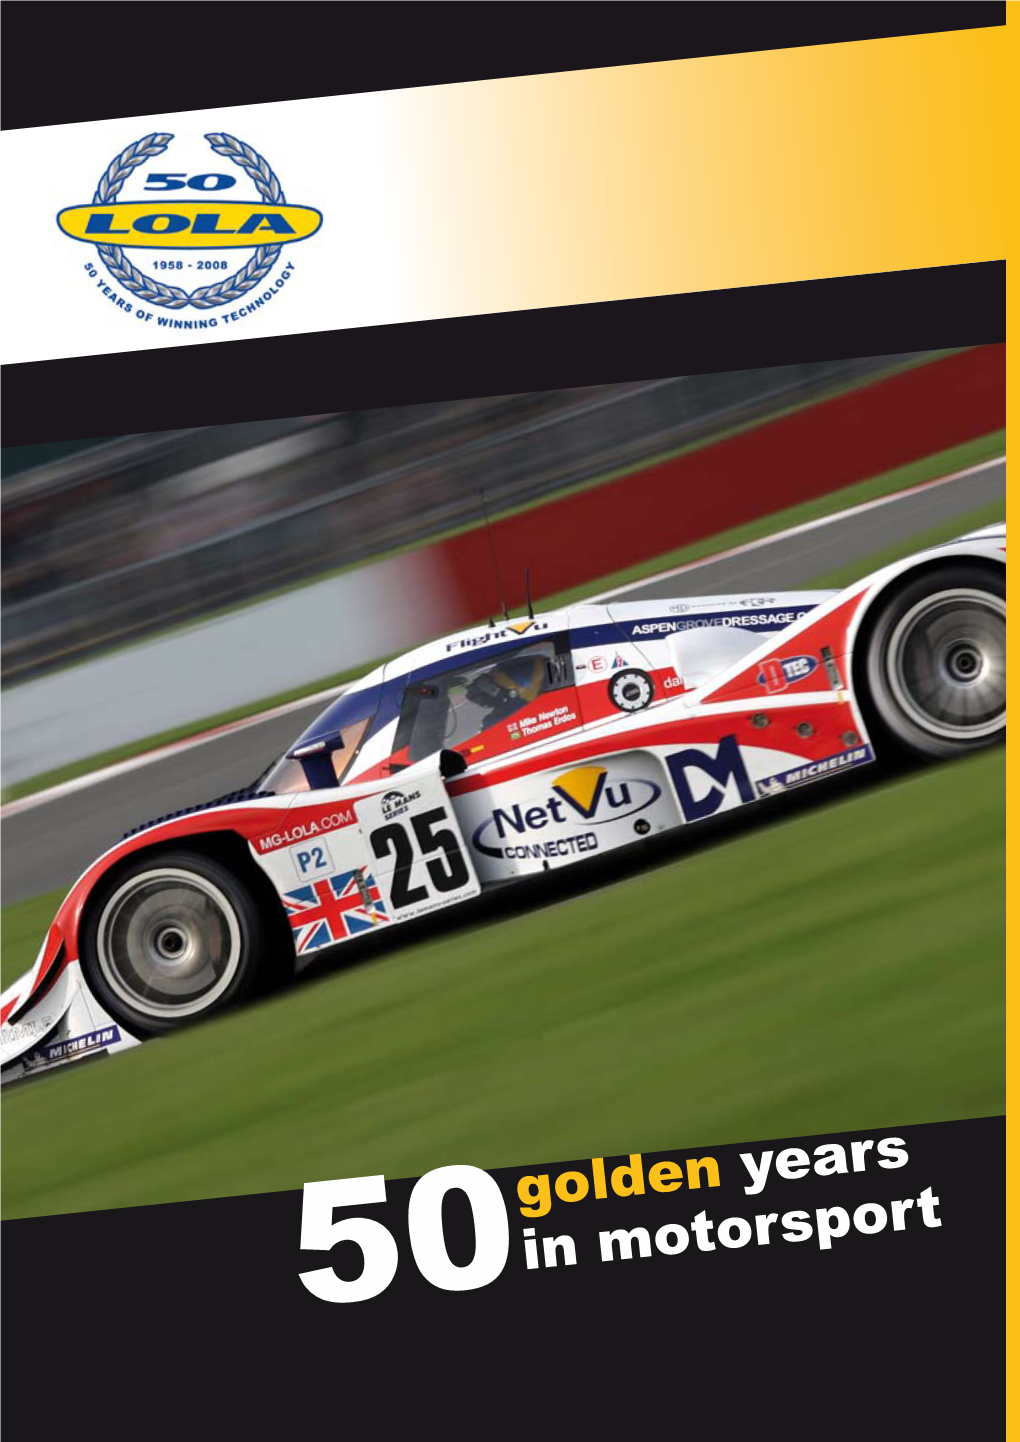 Golden Years in Motorsport This Weekend Lola Will Have Plenty to Celebrate Both on and Off the Track, When They Reach a Memorable 50 Years in Motorsport